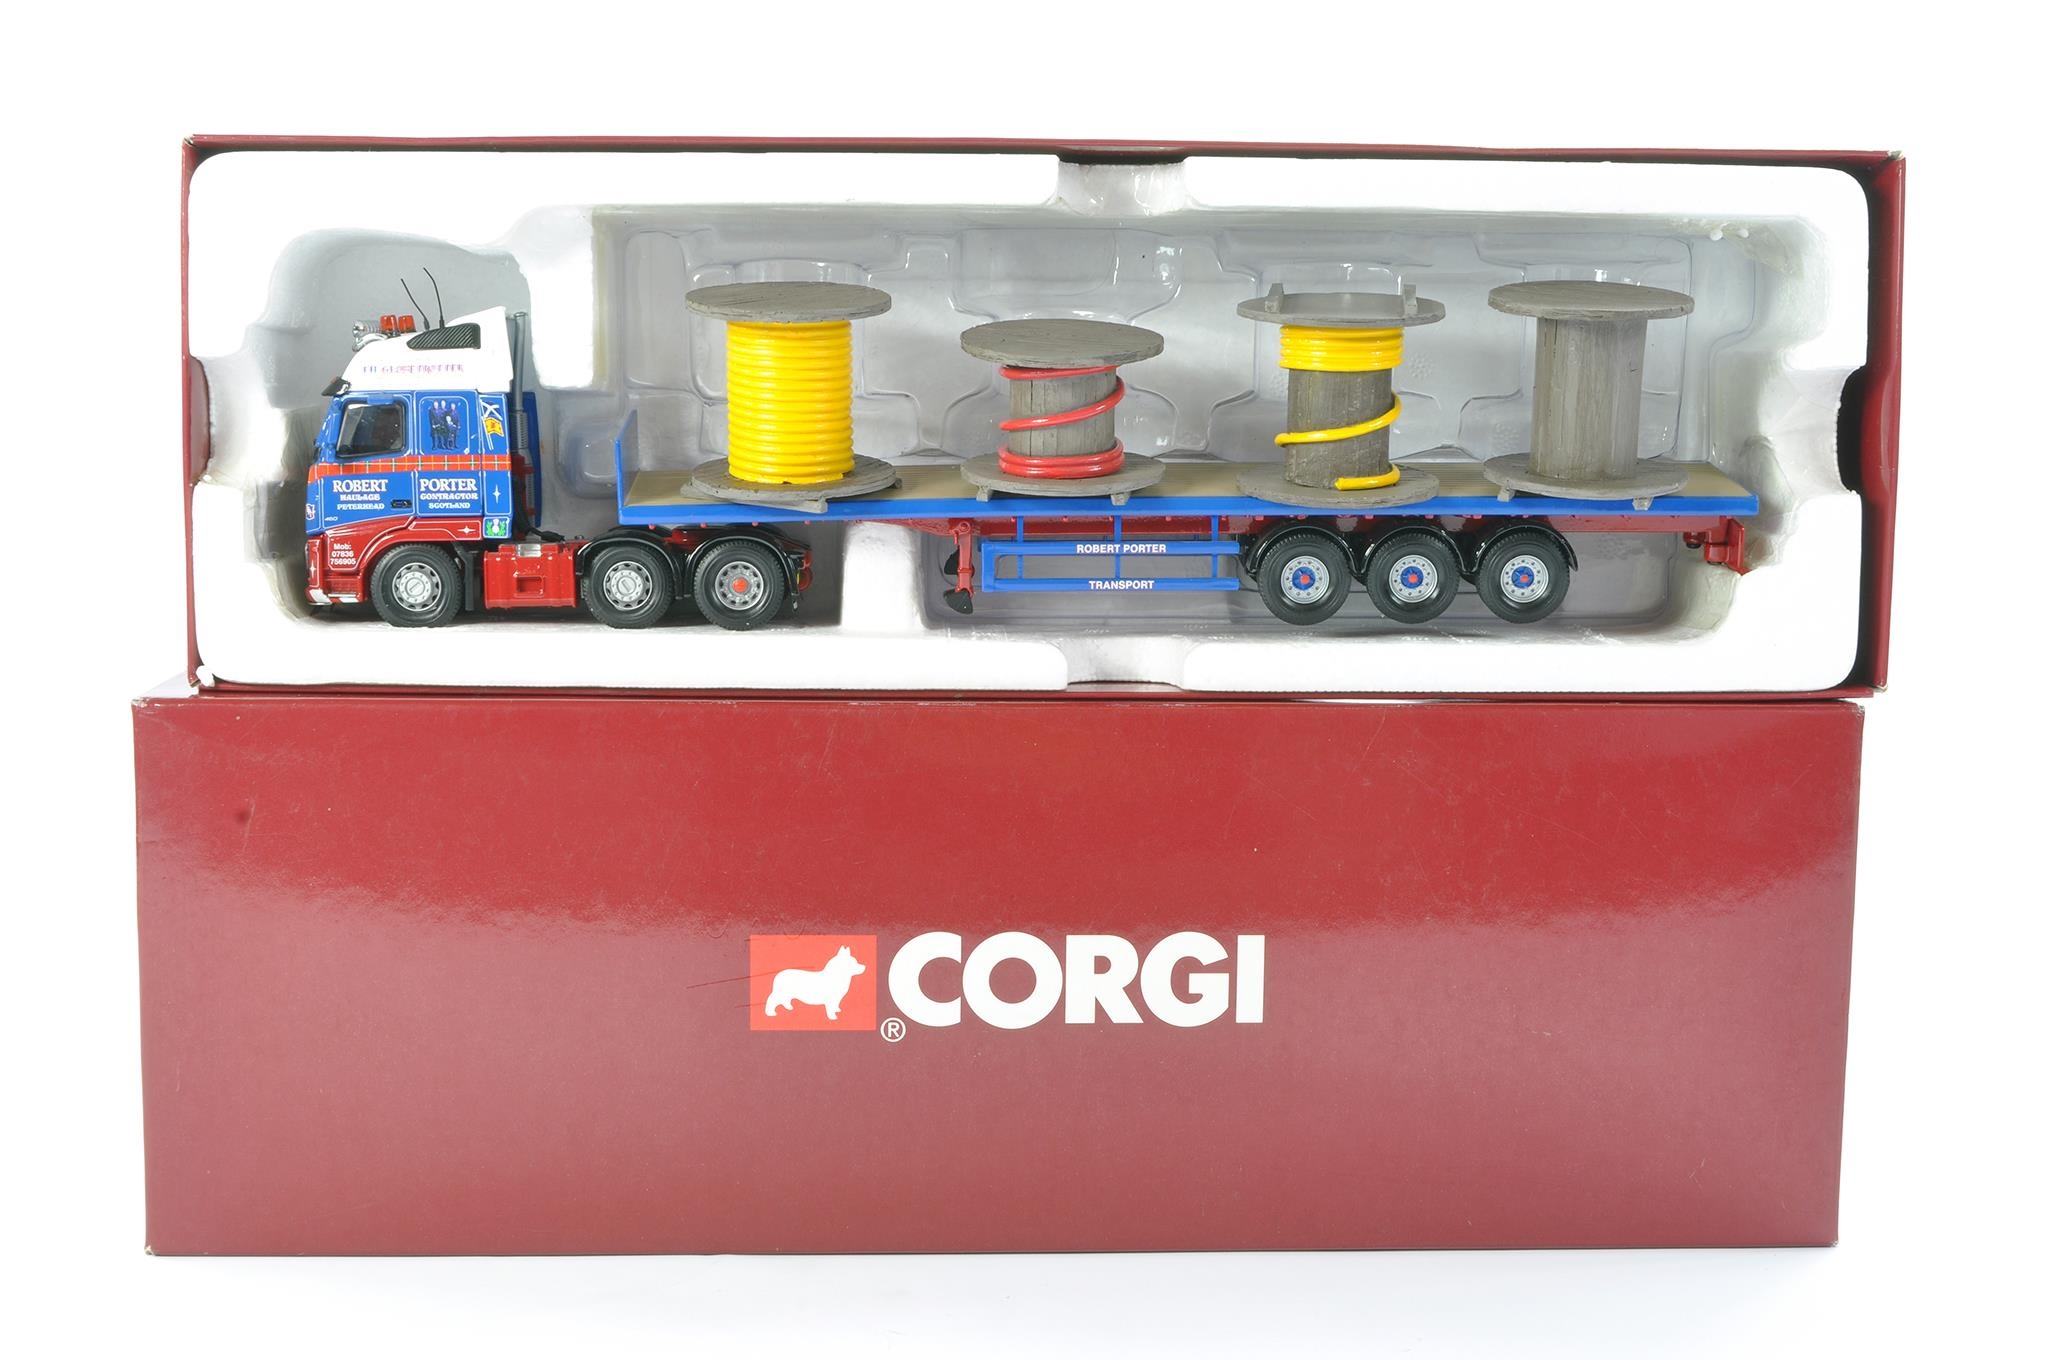 Corgi Diecast Model Truck issue comprising No. CC14031 Volvo Flatbed Trailer with Pipe Load in